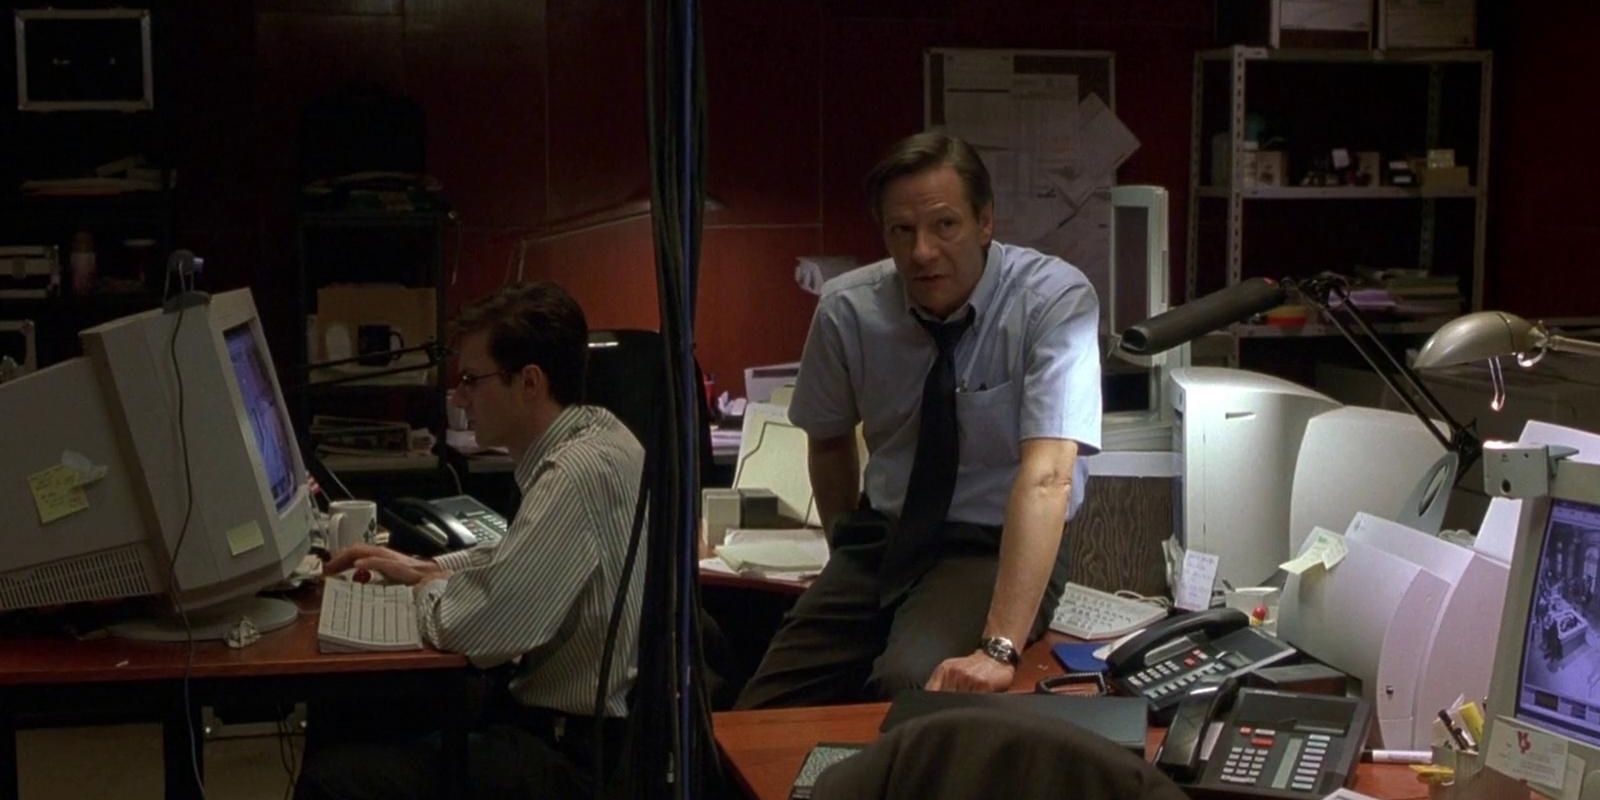 Chris Cooper as Alexander Conklin sitting in an office looking somewhere off-camera in The Bourne Identity